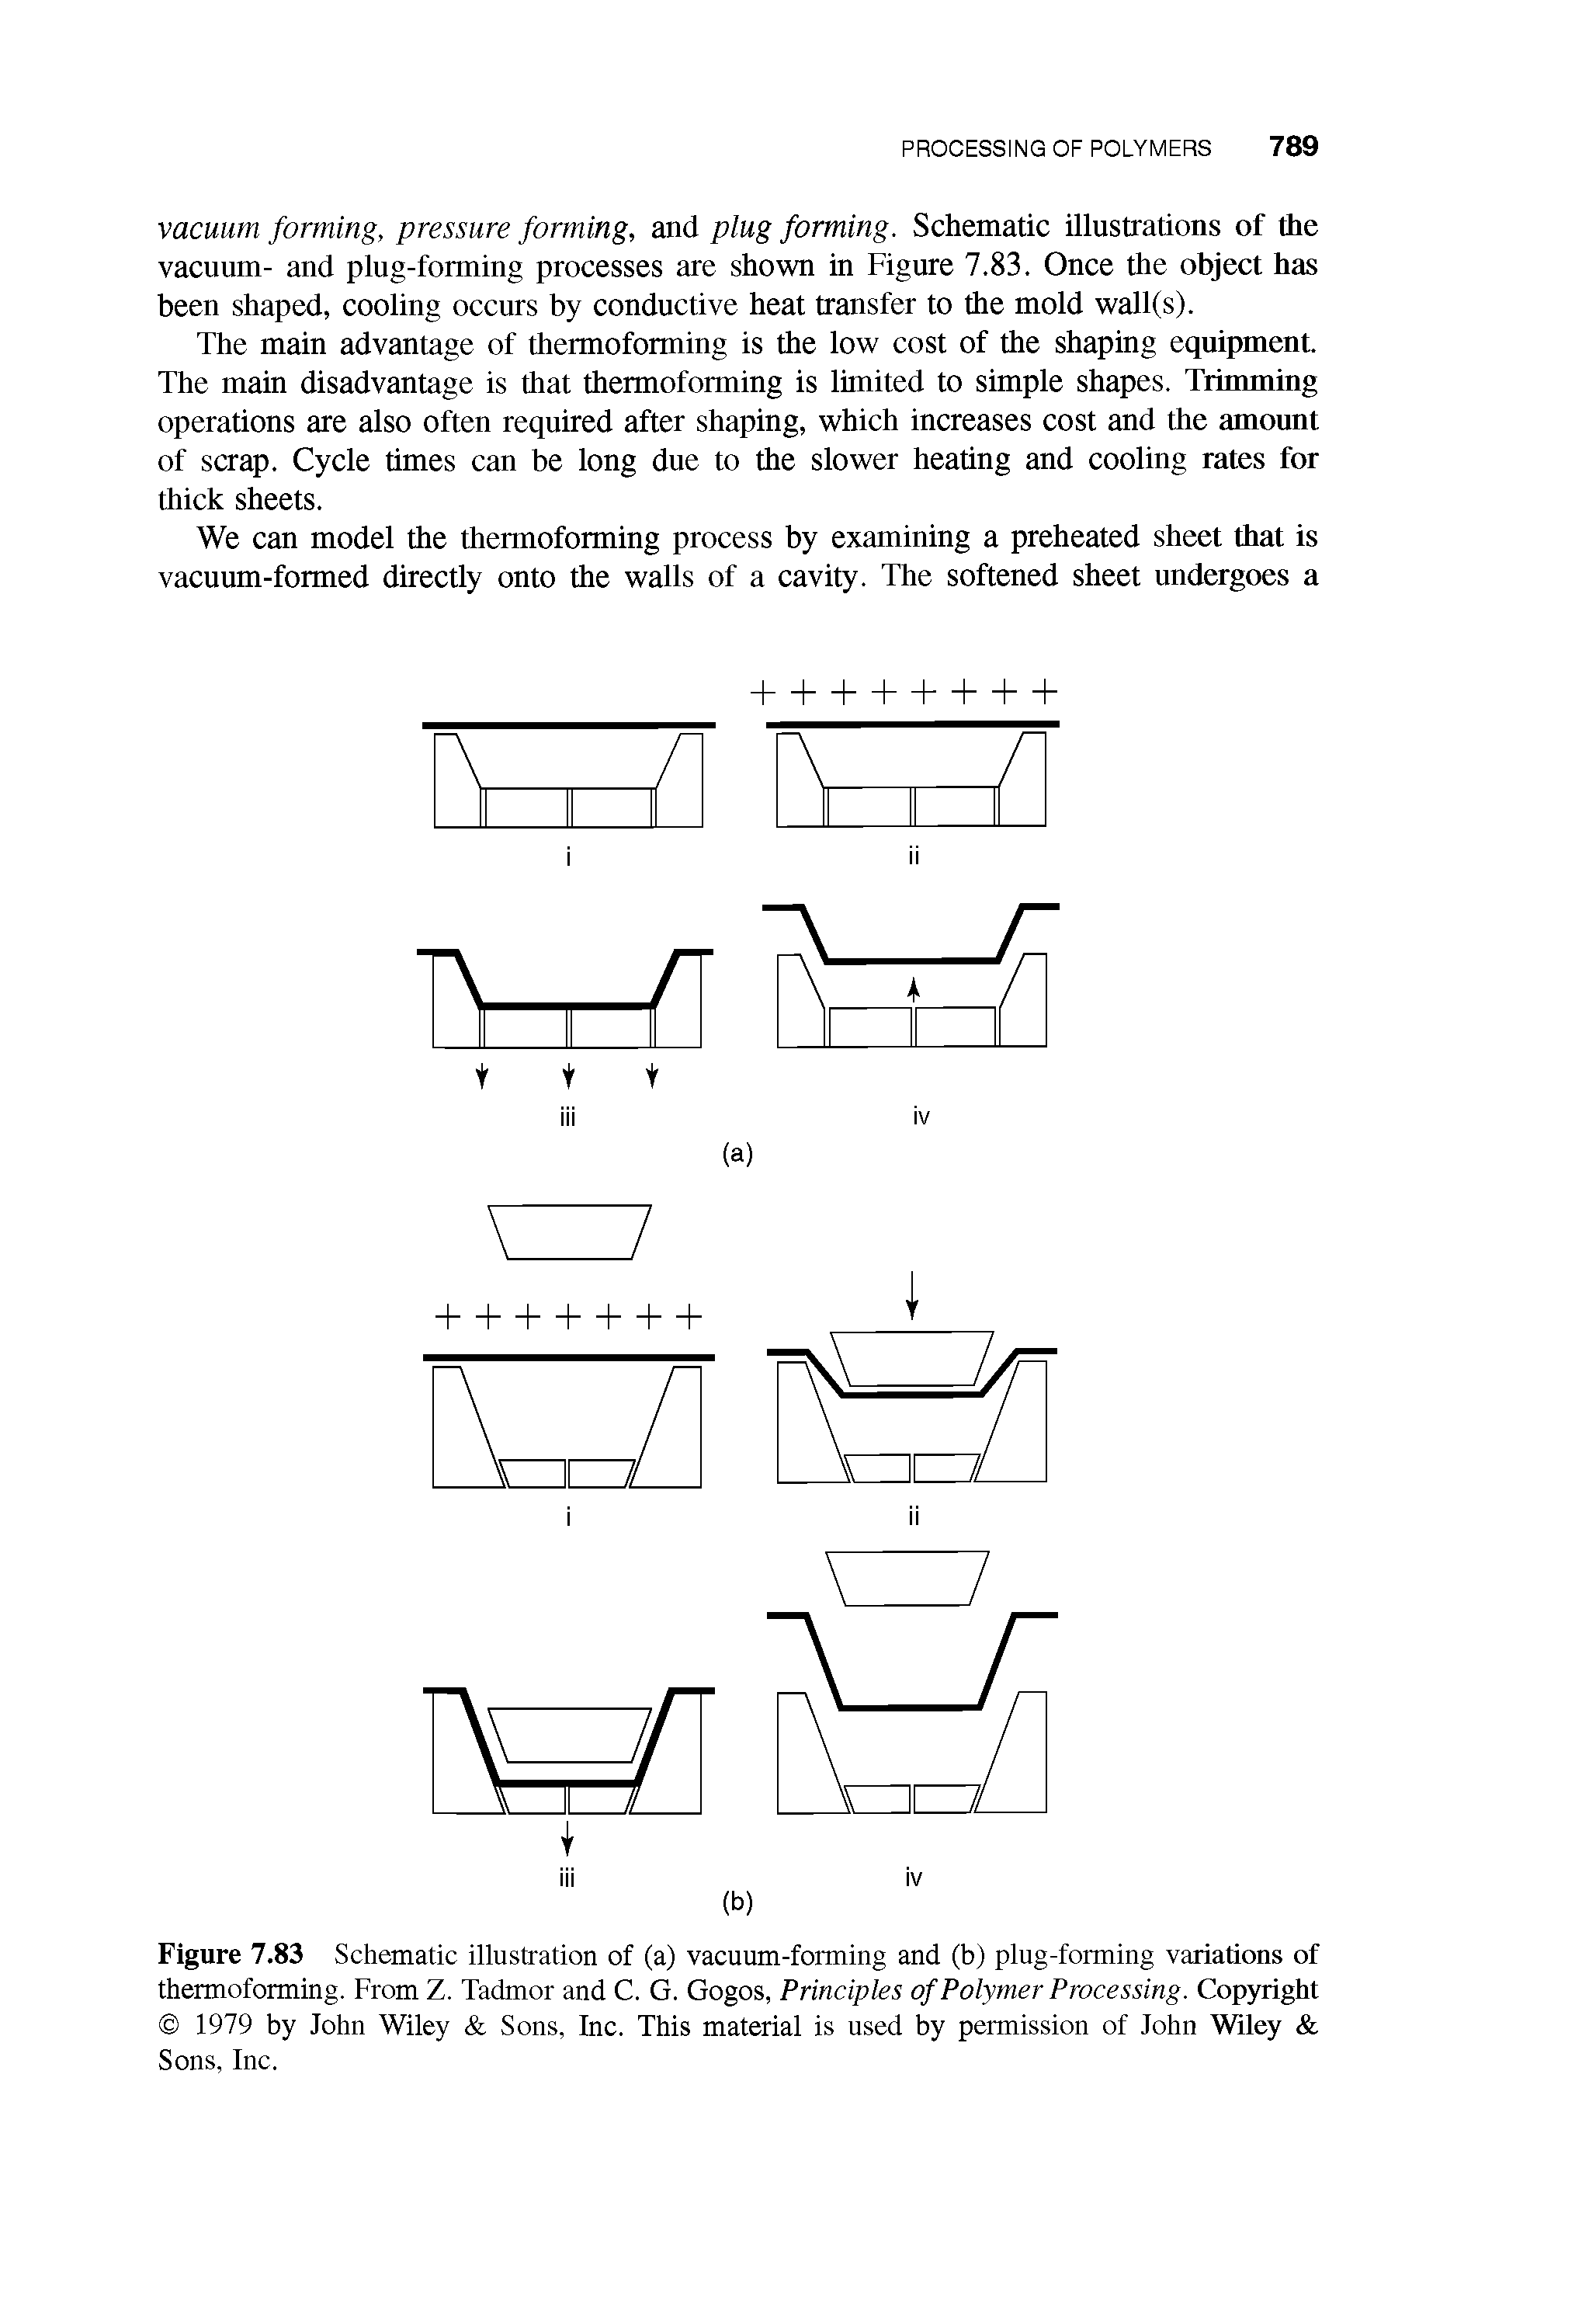 Figure 7.83 Schematic illustration of (a) vacuum-forming and (b) plug-forming variations of thermoforming. From Z. Tadmor and C. G. Gogos, Principles of Polymer Processing. Copyright 1979 by John Wiley Sons, Inc. This material is used by permission of John Wiley Sons, Inc.